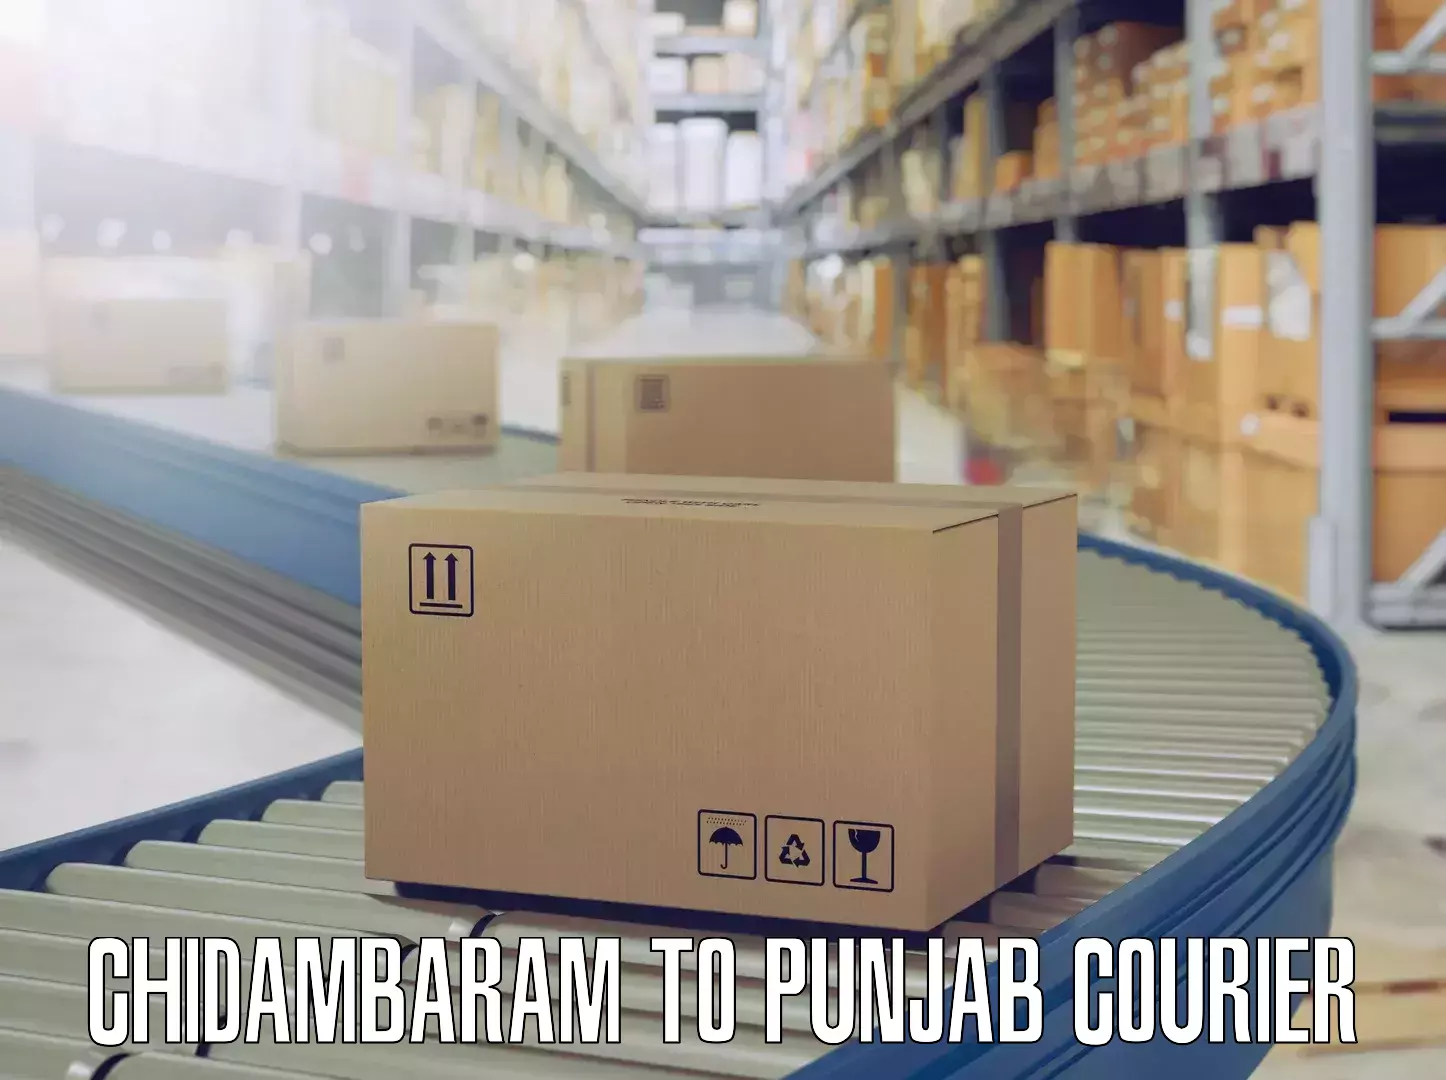 Professional movers and packers Chidambaram to Punjab